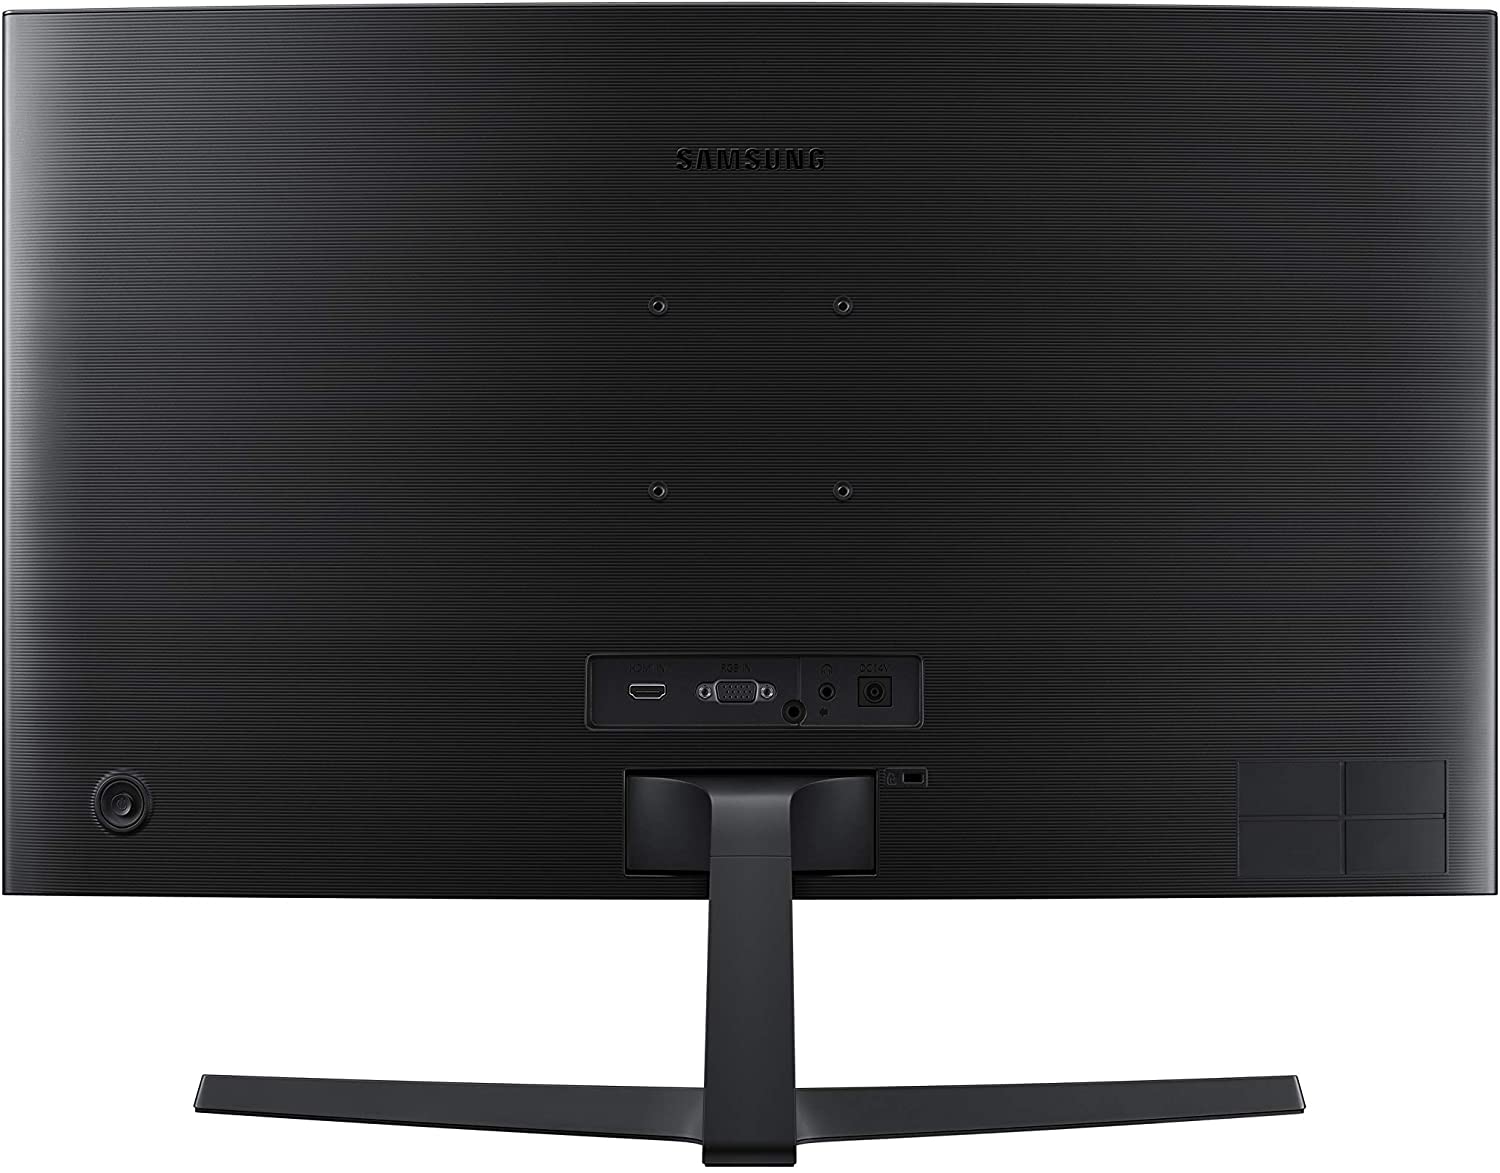 Samsung LC24F396FHNXZA-RB 24" CF396 Curved LED Monitor - Certified Refurbished